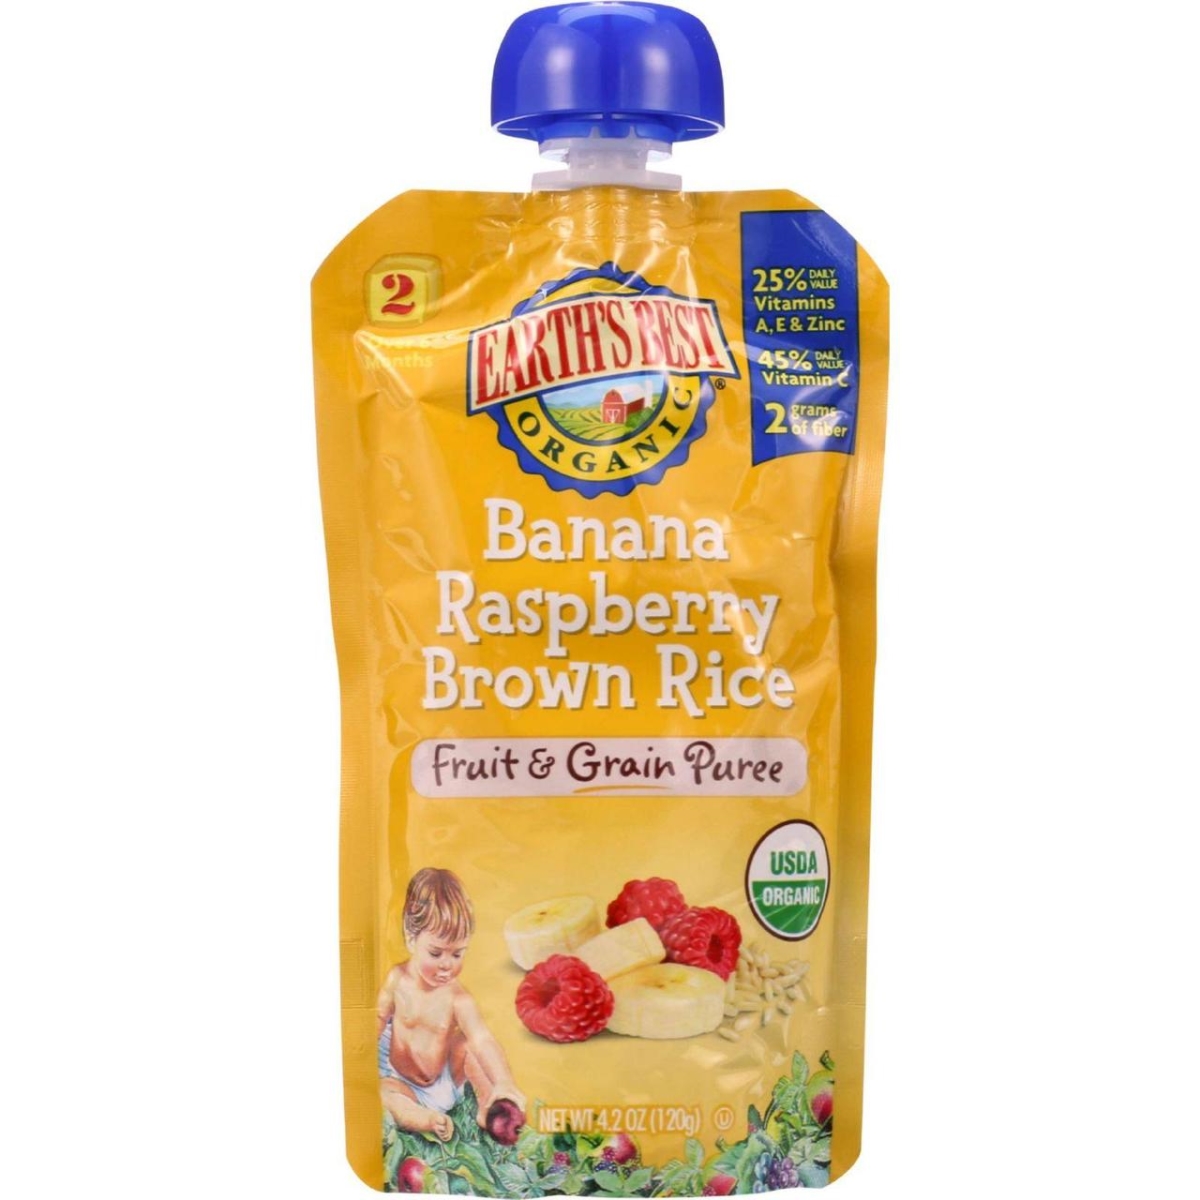 Hg1154863 4.2 Oz Organic Fruit & Grain Puree Baby Food For Age 6 Months Plus, Stage 2 - Banana Raspberry Brown Rice, Case Of 12